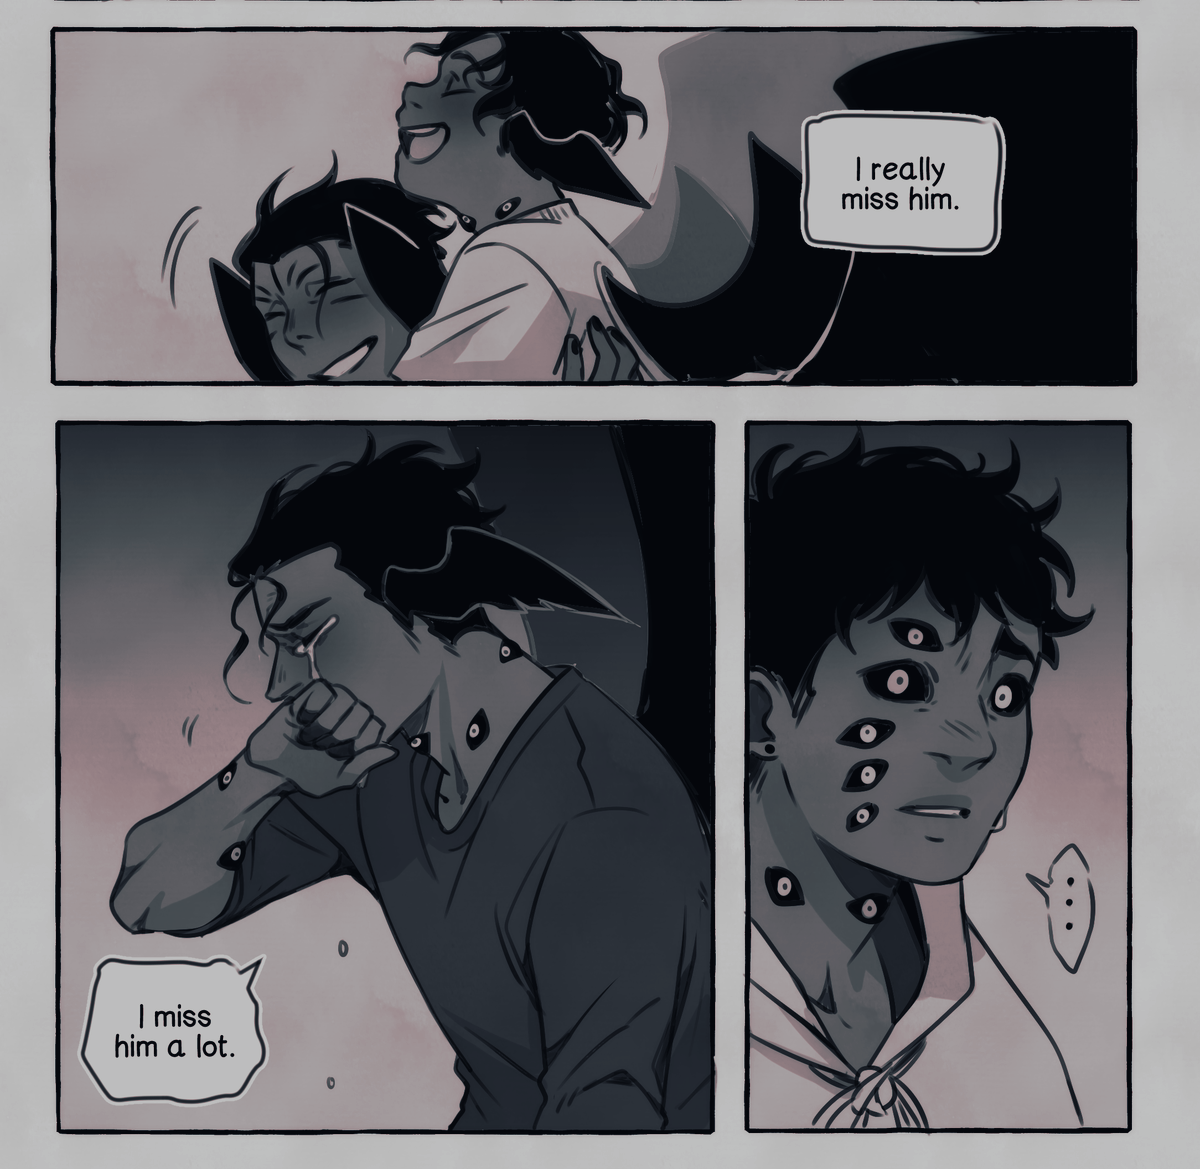 talking about ezechiel's father who died when he was young
sadly zach never had the chance to meet him and their mother's grieve was too huge to talk about him 